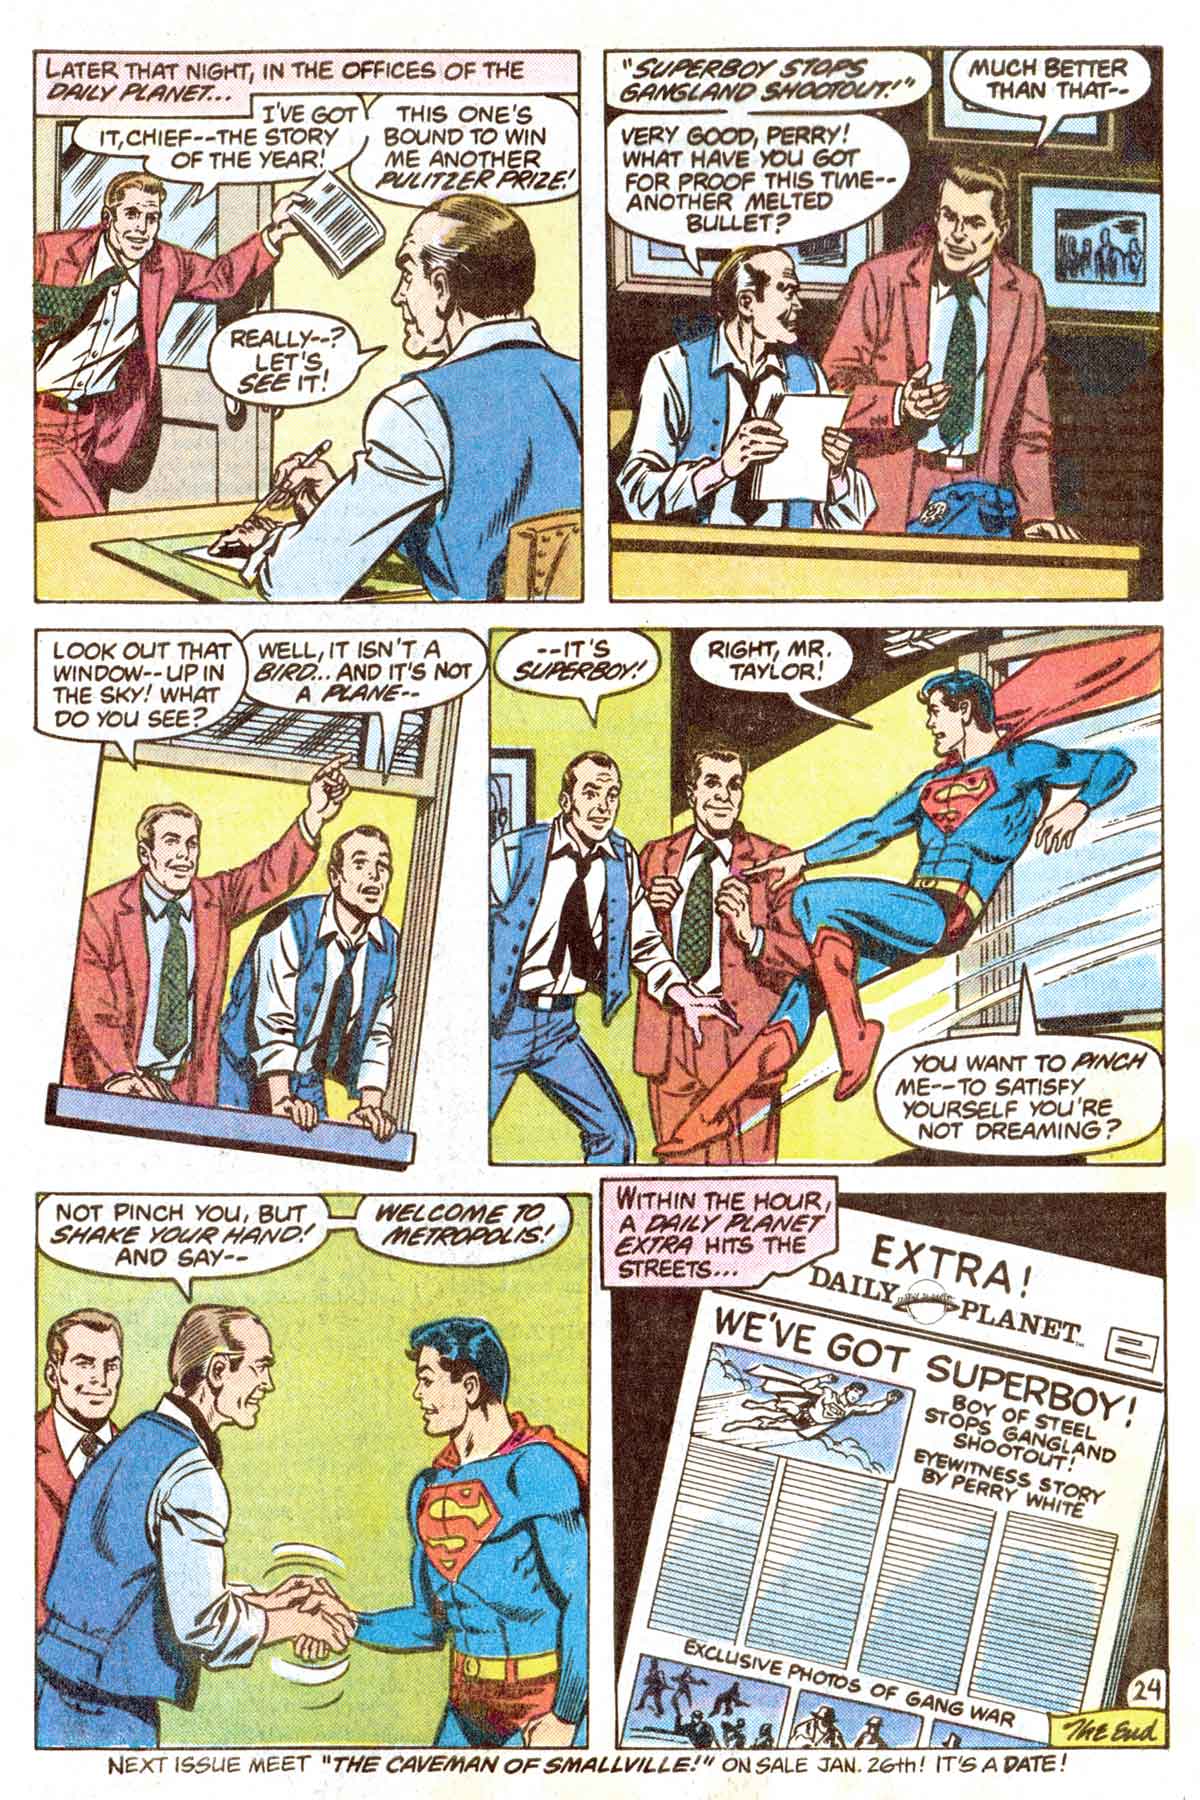 Read online The New Adventures of Superboy comic -  Issue #51 - 26